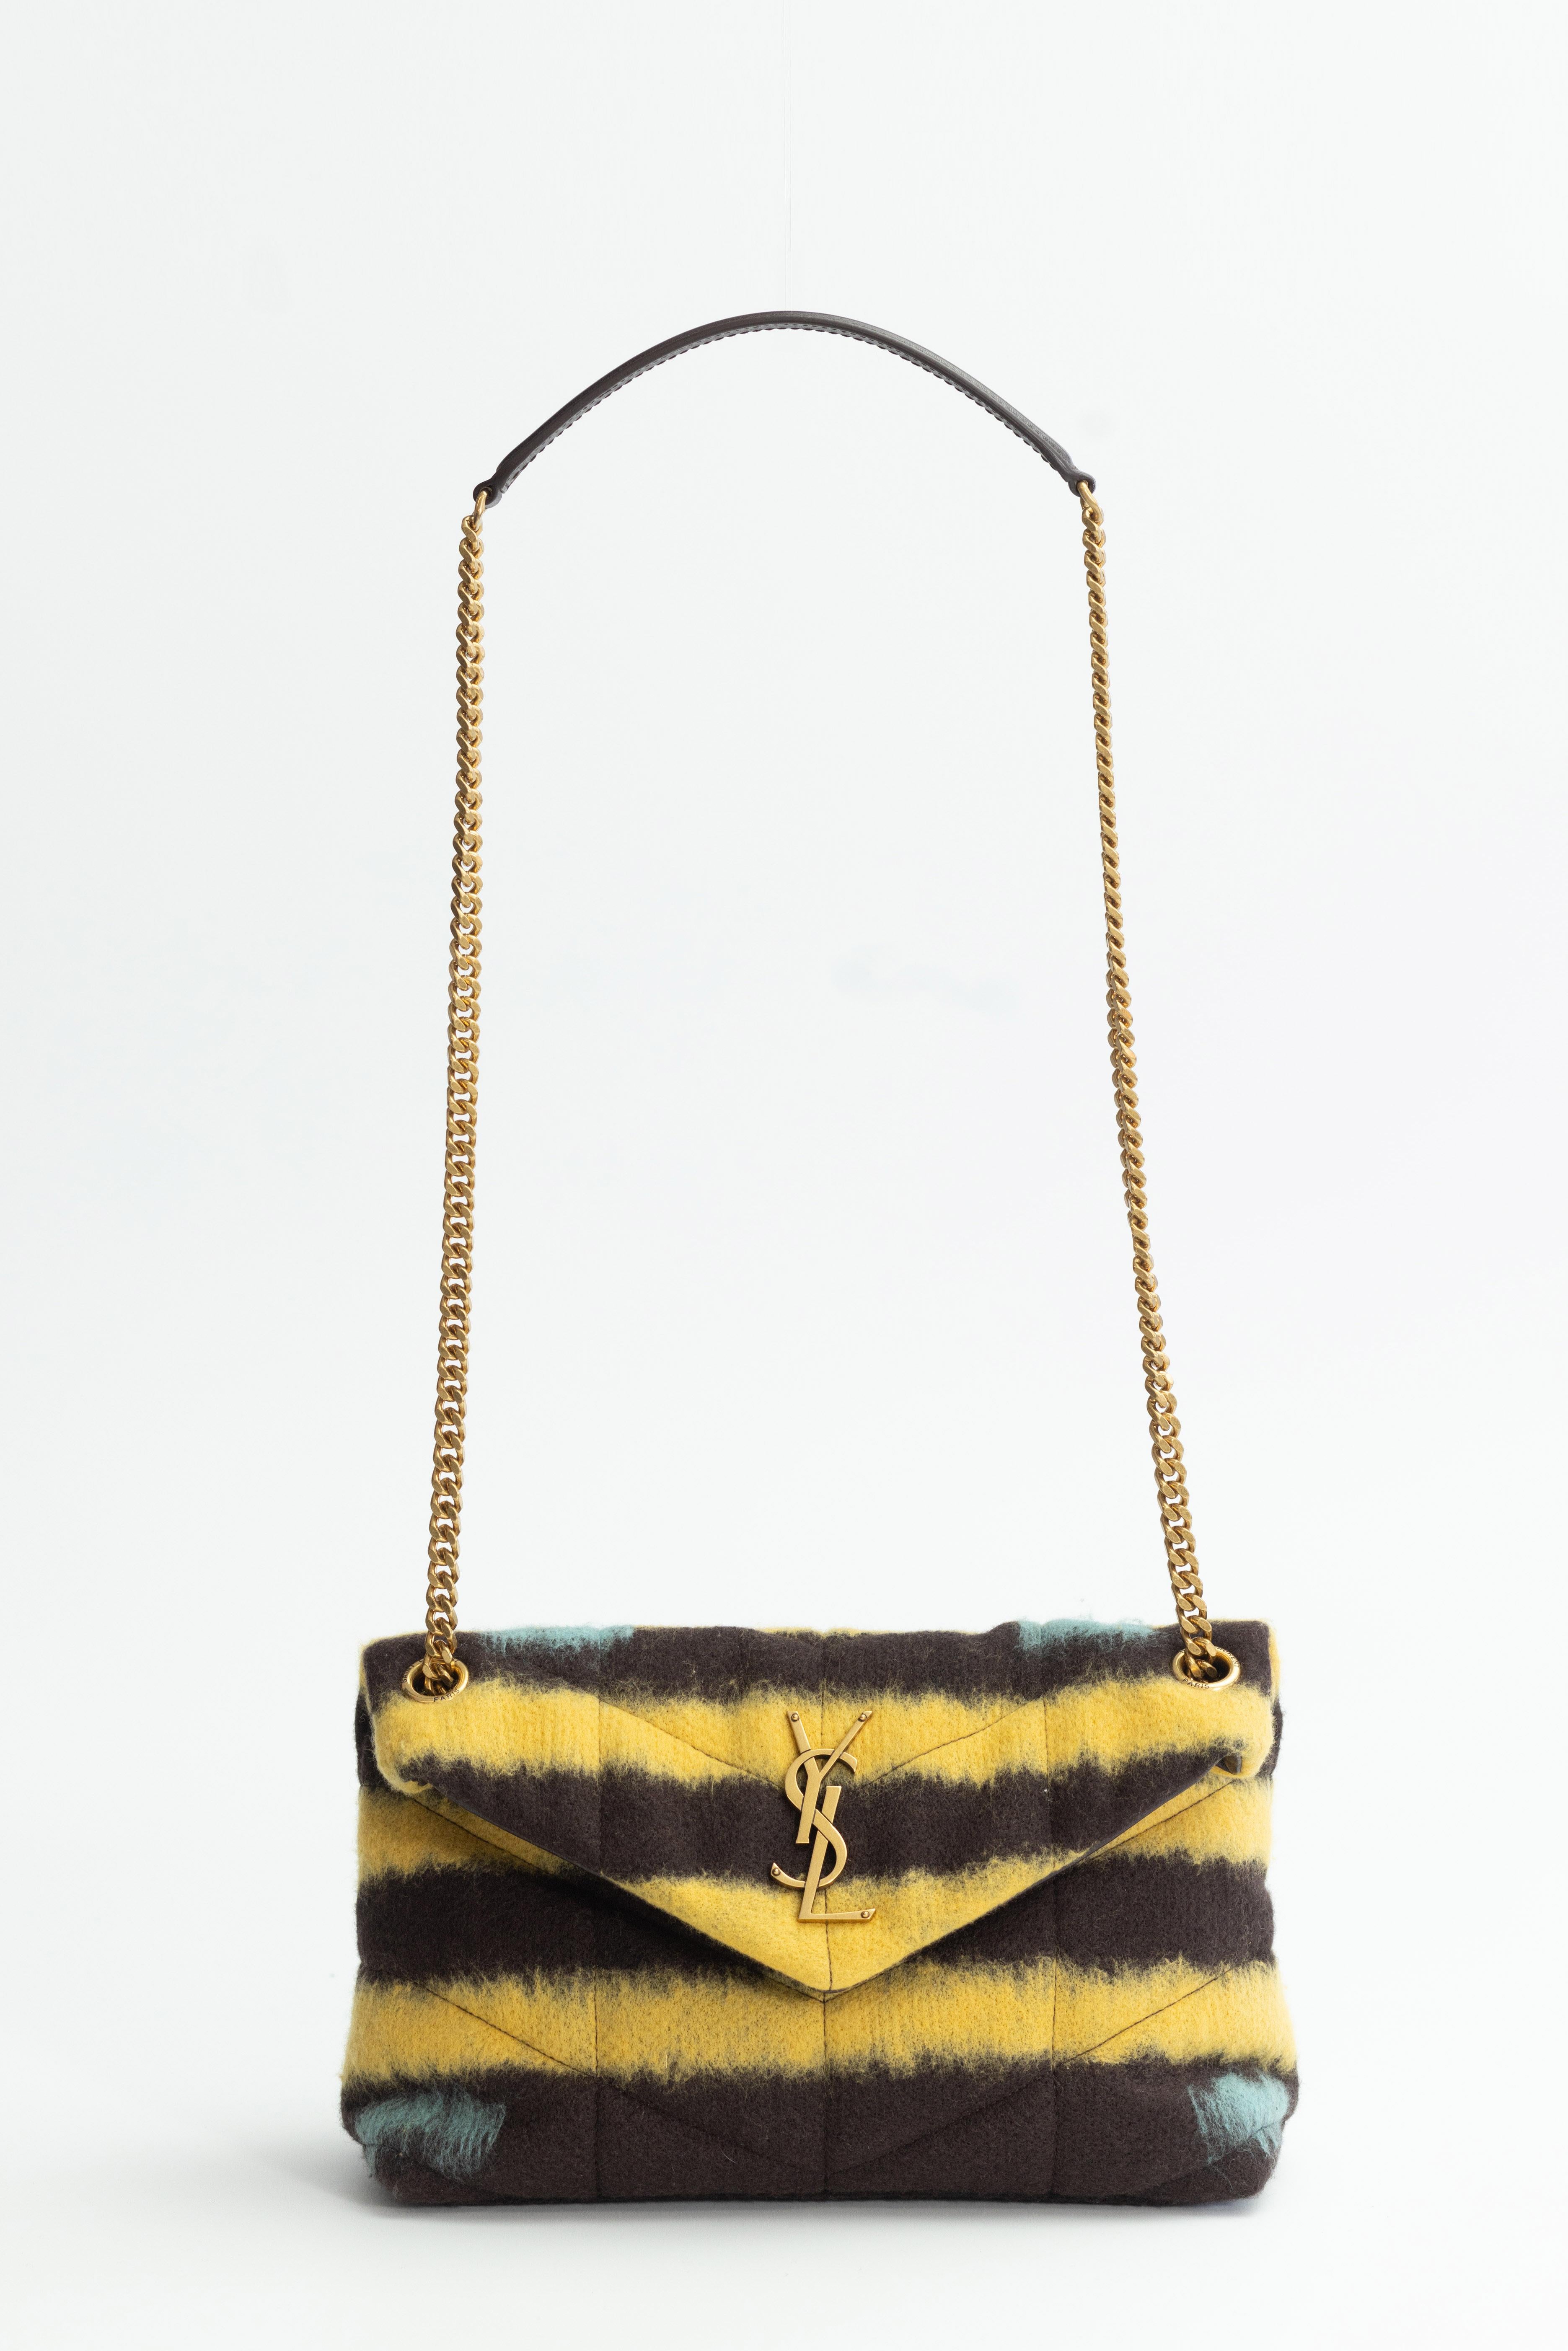 Saint Laurent Tie Dye Yellow Small Loulou Puffer Bag For Sale 1